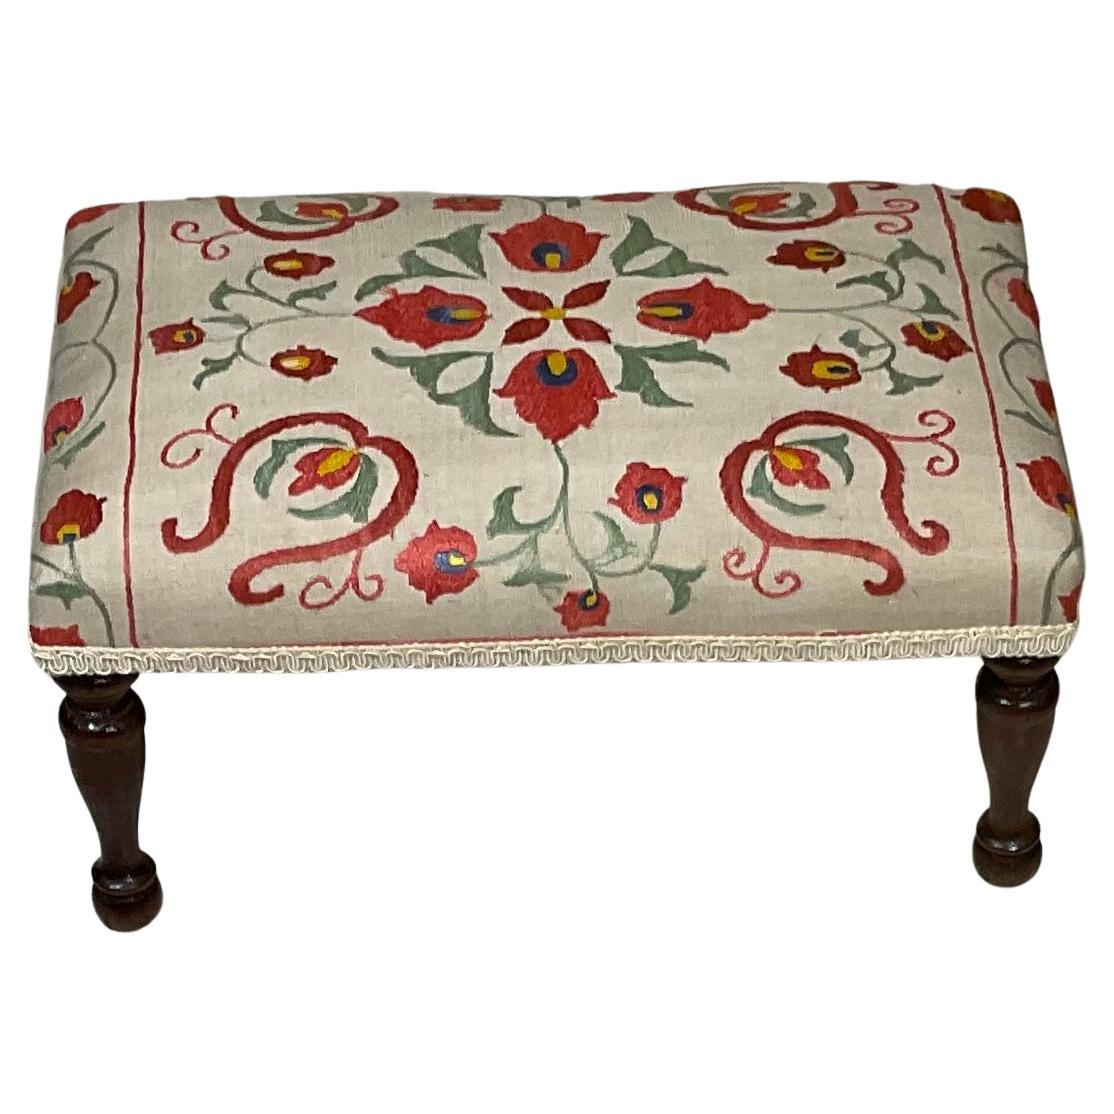 Vintage Hand Embroidery Suzani Textile Upholstered Foot Stool